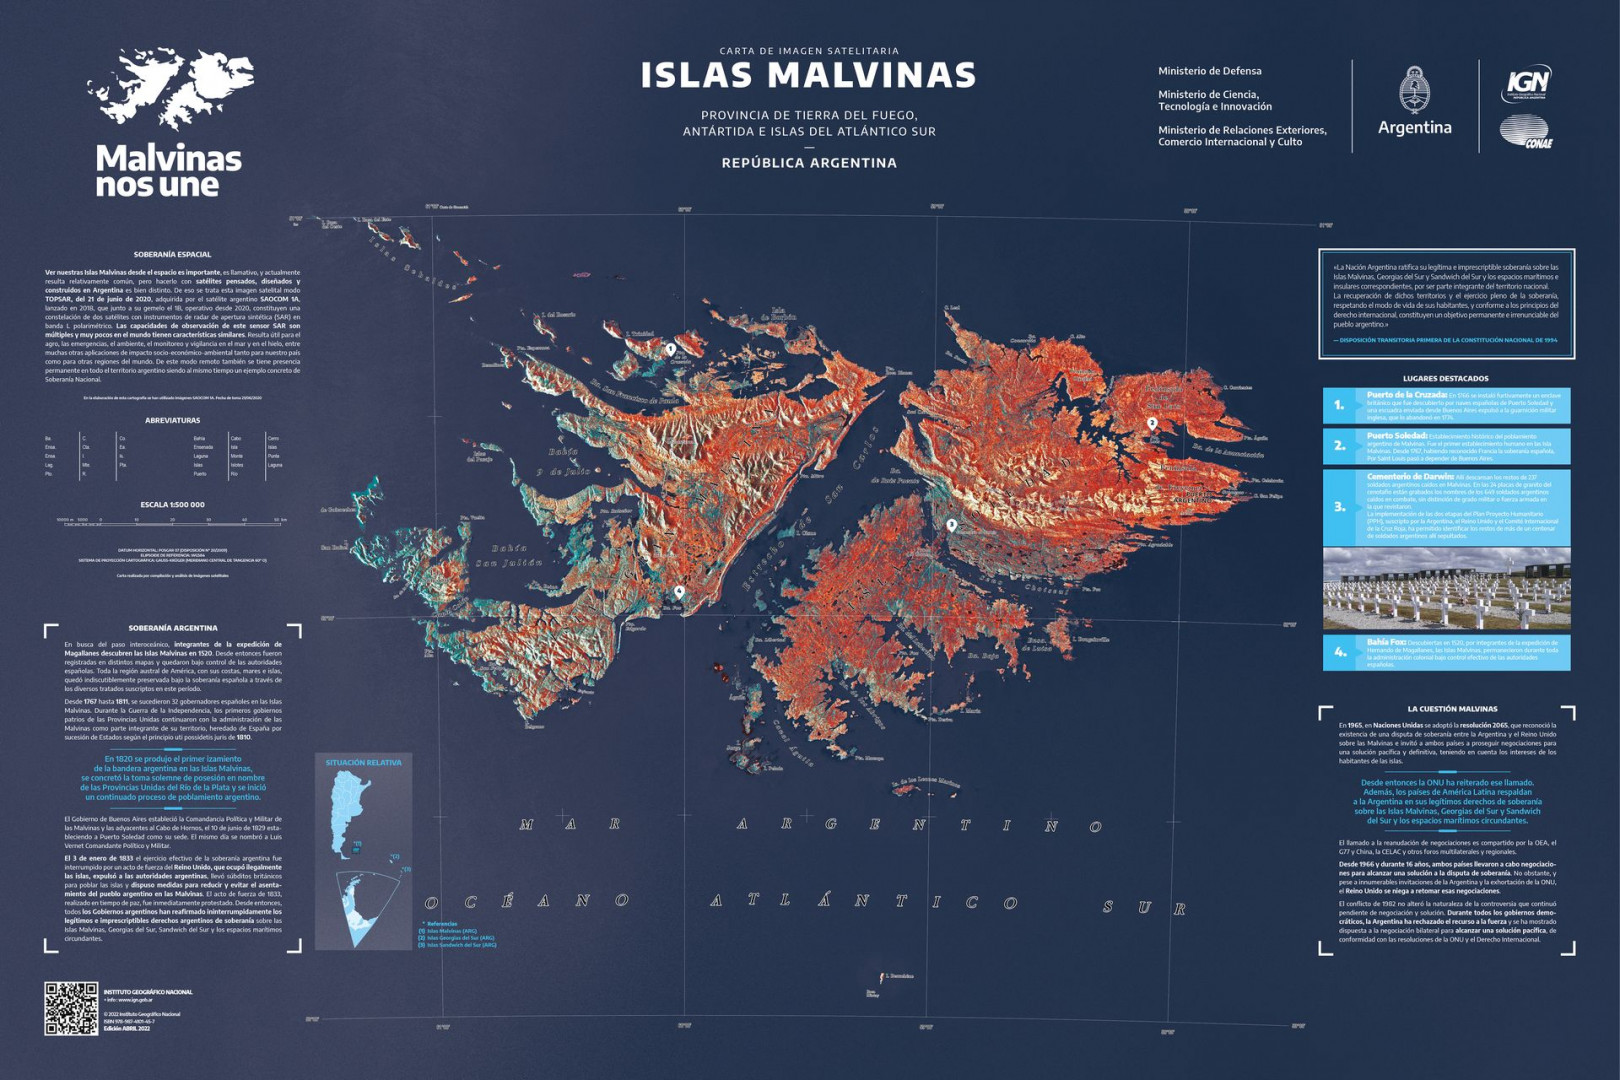 Spatial Sovereignty: The Malvinas Islands as seen by Argentine satellite SAOCOM